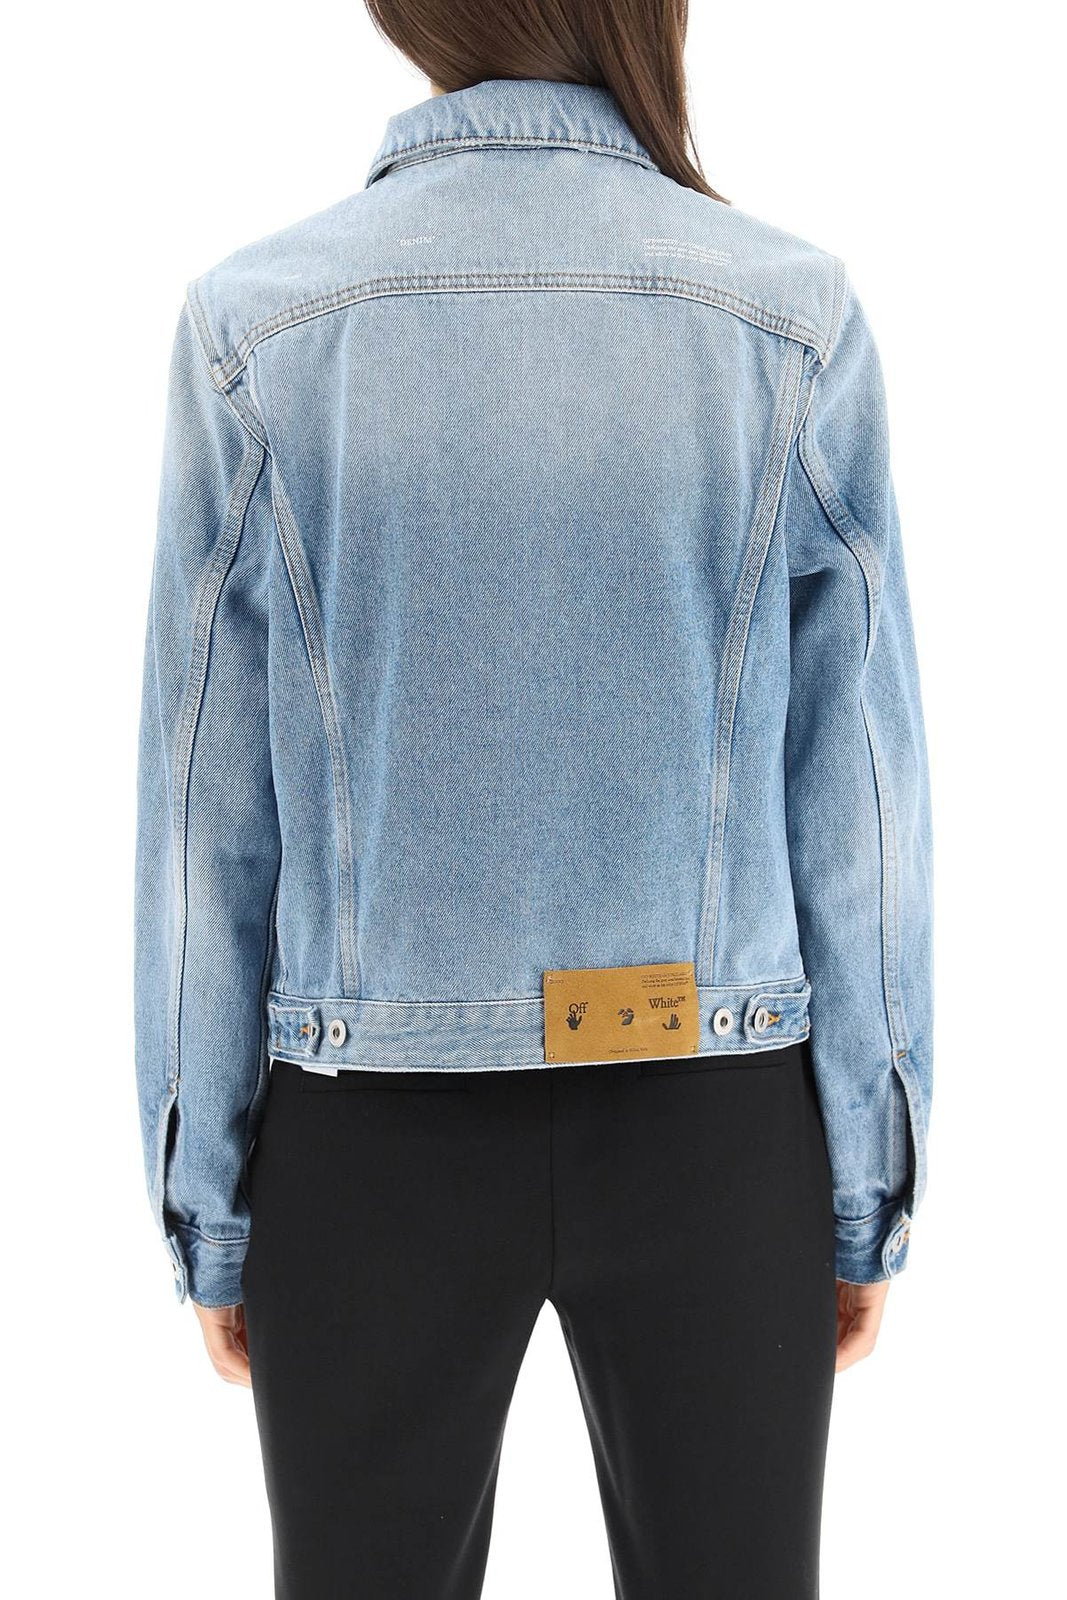 Off-White Buttoned Long-Sleeved Denim Jacket